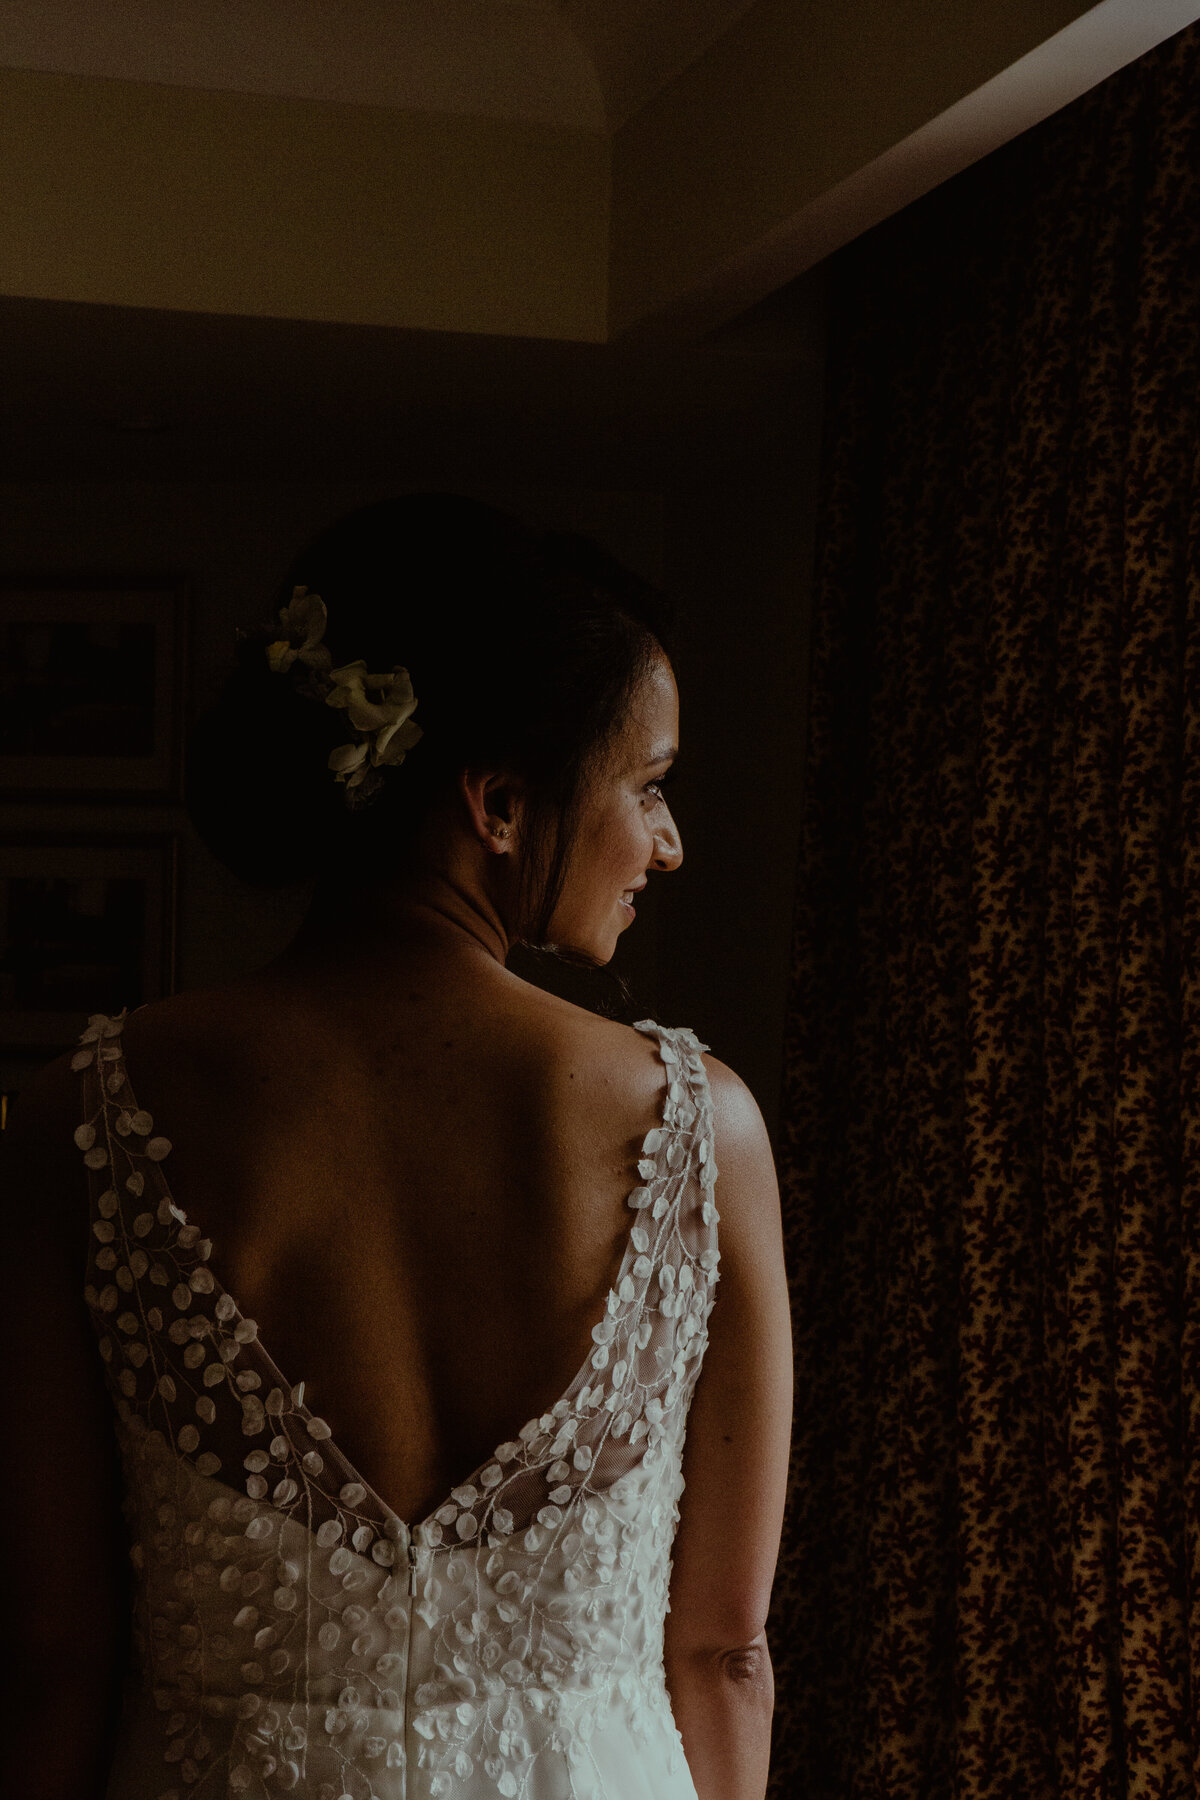 Romantic wedding at the Berystede spa hotel in Sunninghill, Ascot